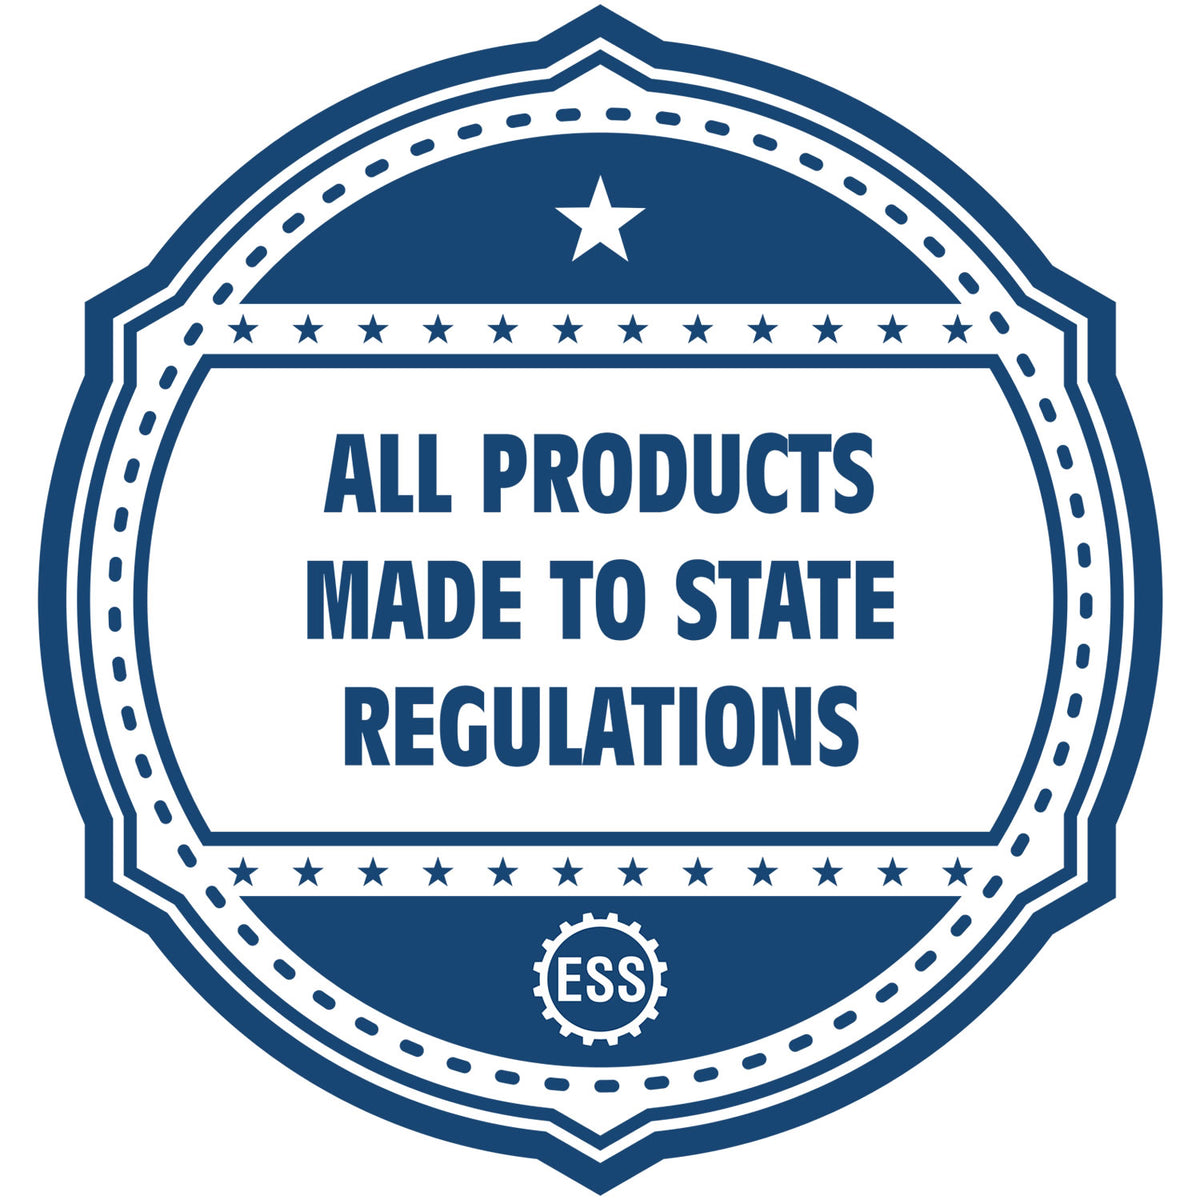 An icon or badge element for the State of Delaware Soft Land Surveyor Embossing Seal showing that this product is made in compliance with state regulations.